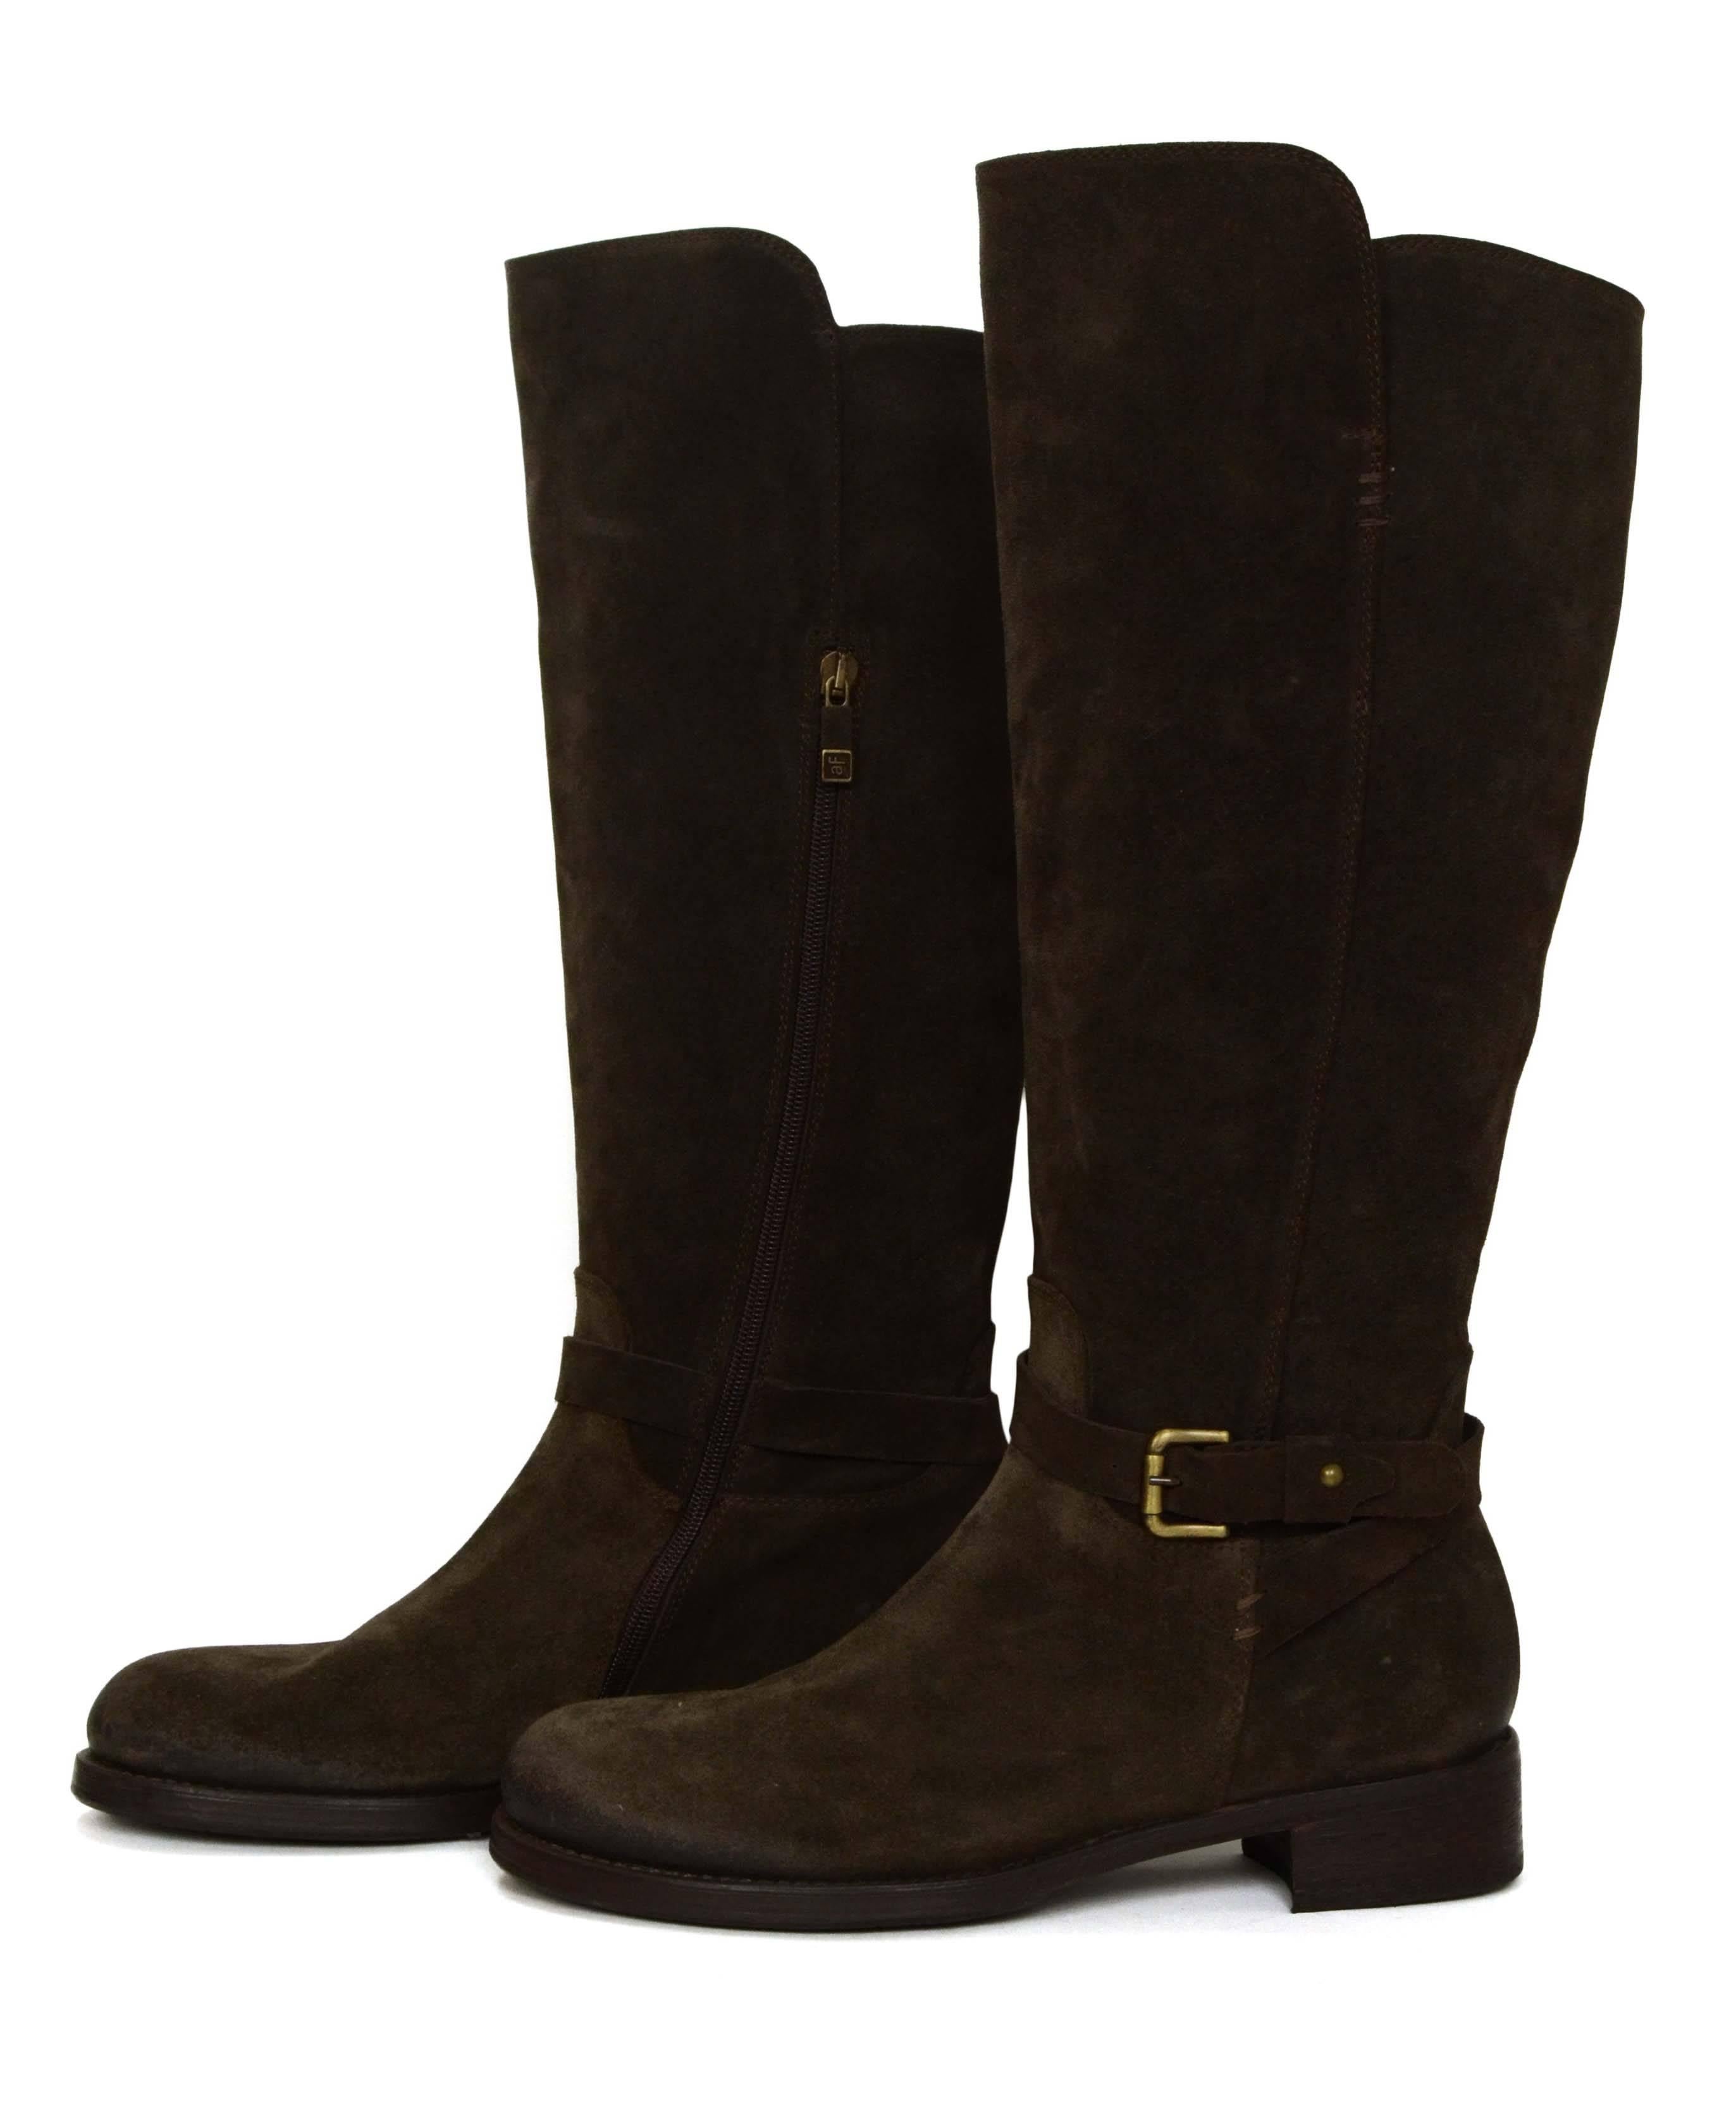 Alberto Fermani Brown Suede Knee-High Boots 
Features decorative buckle at ankle
Made In: Italy
Color: Dark brown
Materials: Suede
Closure/Opening: Interior side zipper
Sole Stamp: Alberto Fermani Made in Italy Since 1960 40
Overall